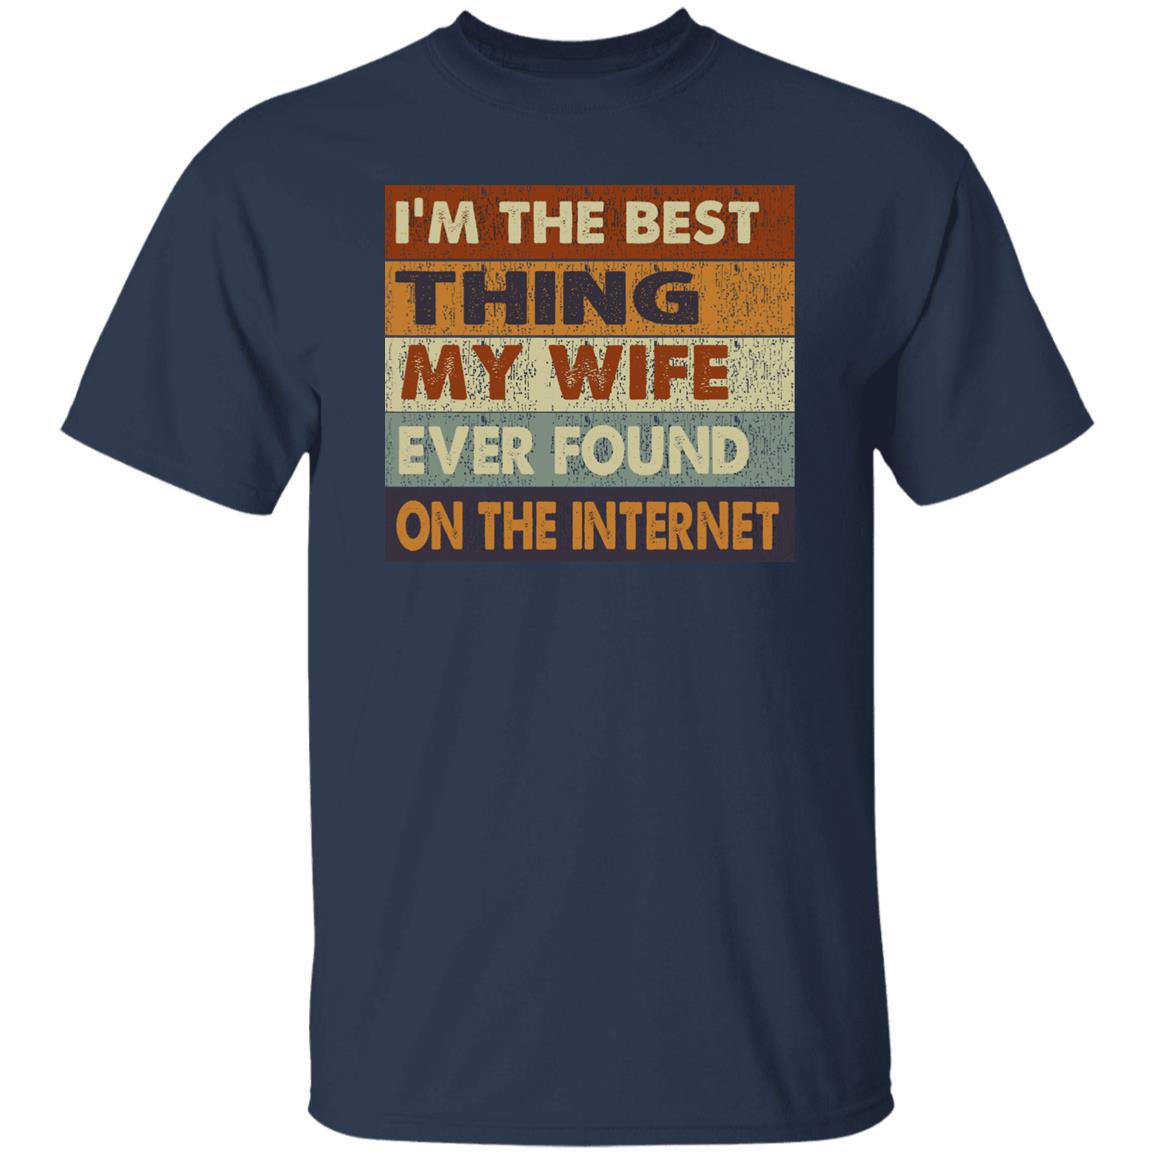 I'm the best thing my wife ever found on the internet t-shirt